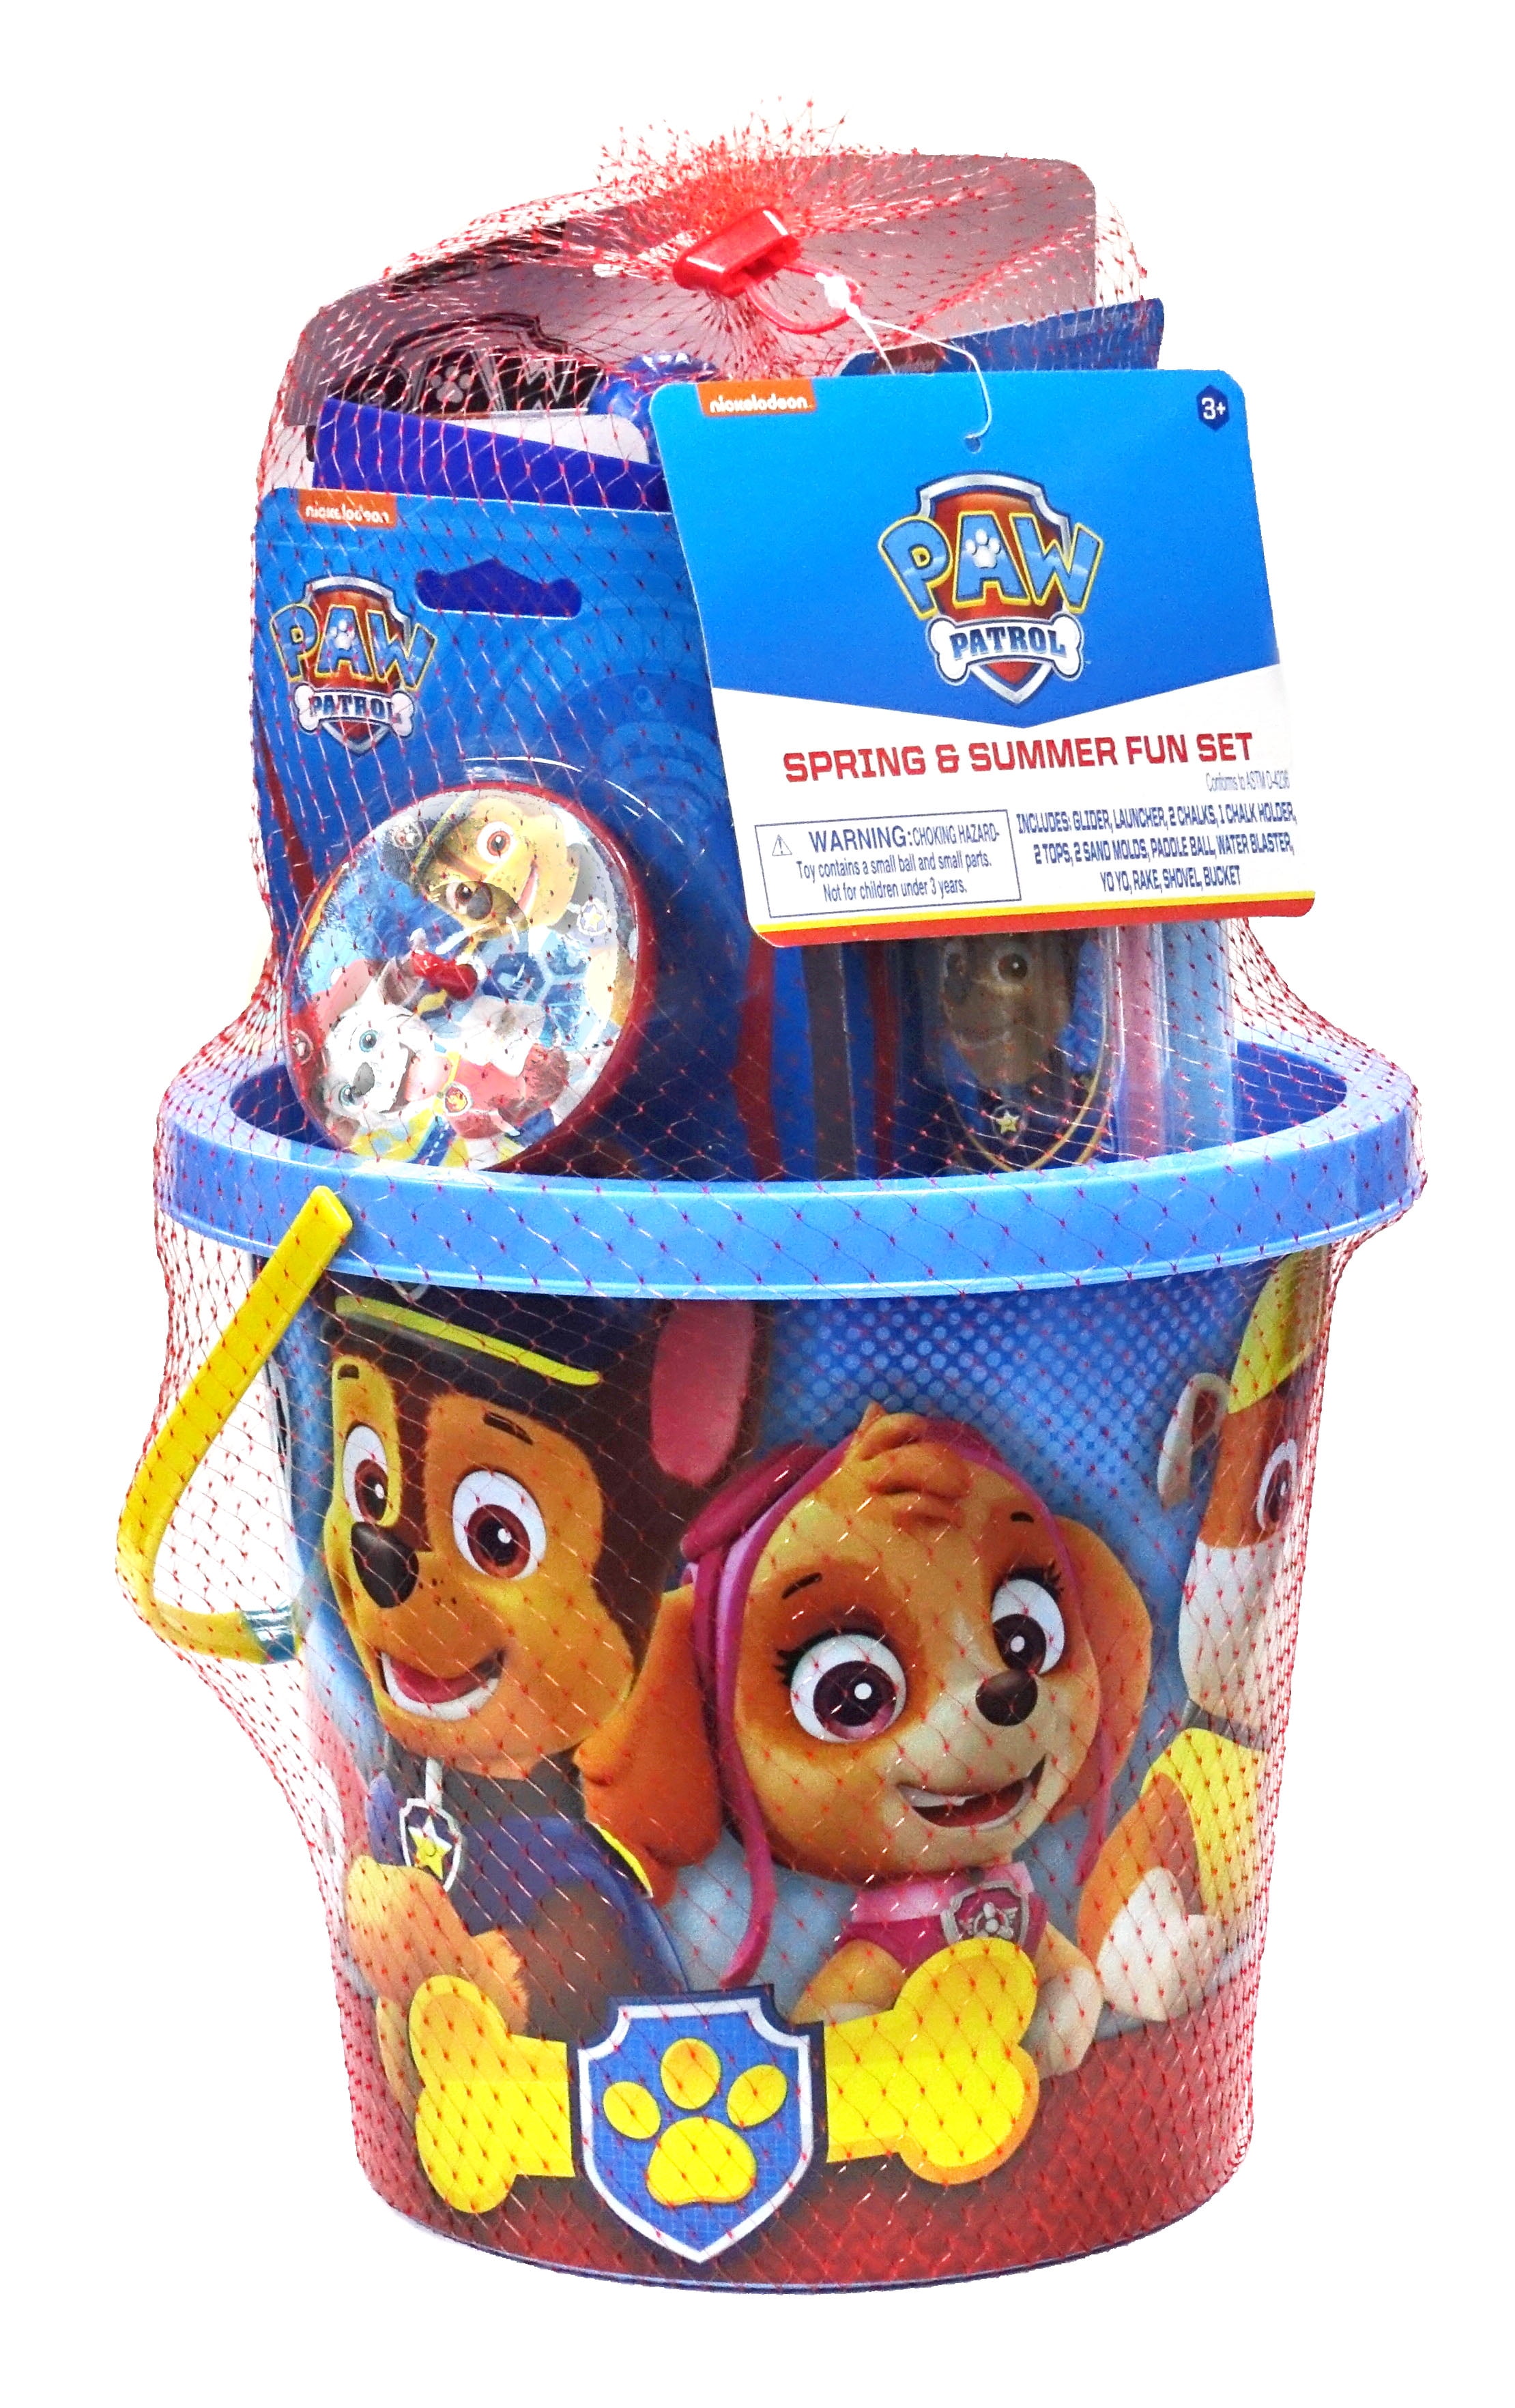 Nickelodeon Paw Patrol Spring & Summer Fun Plastic Bucket Set with Sand,  Chalk, Water, and Novelty Toys, for Ages 3+